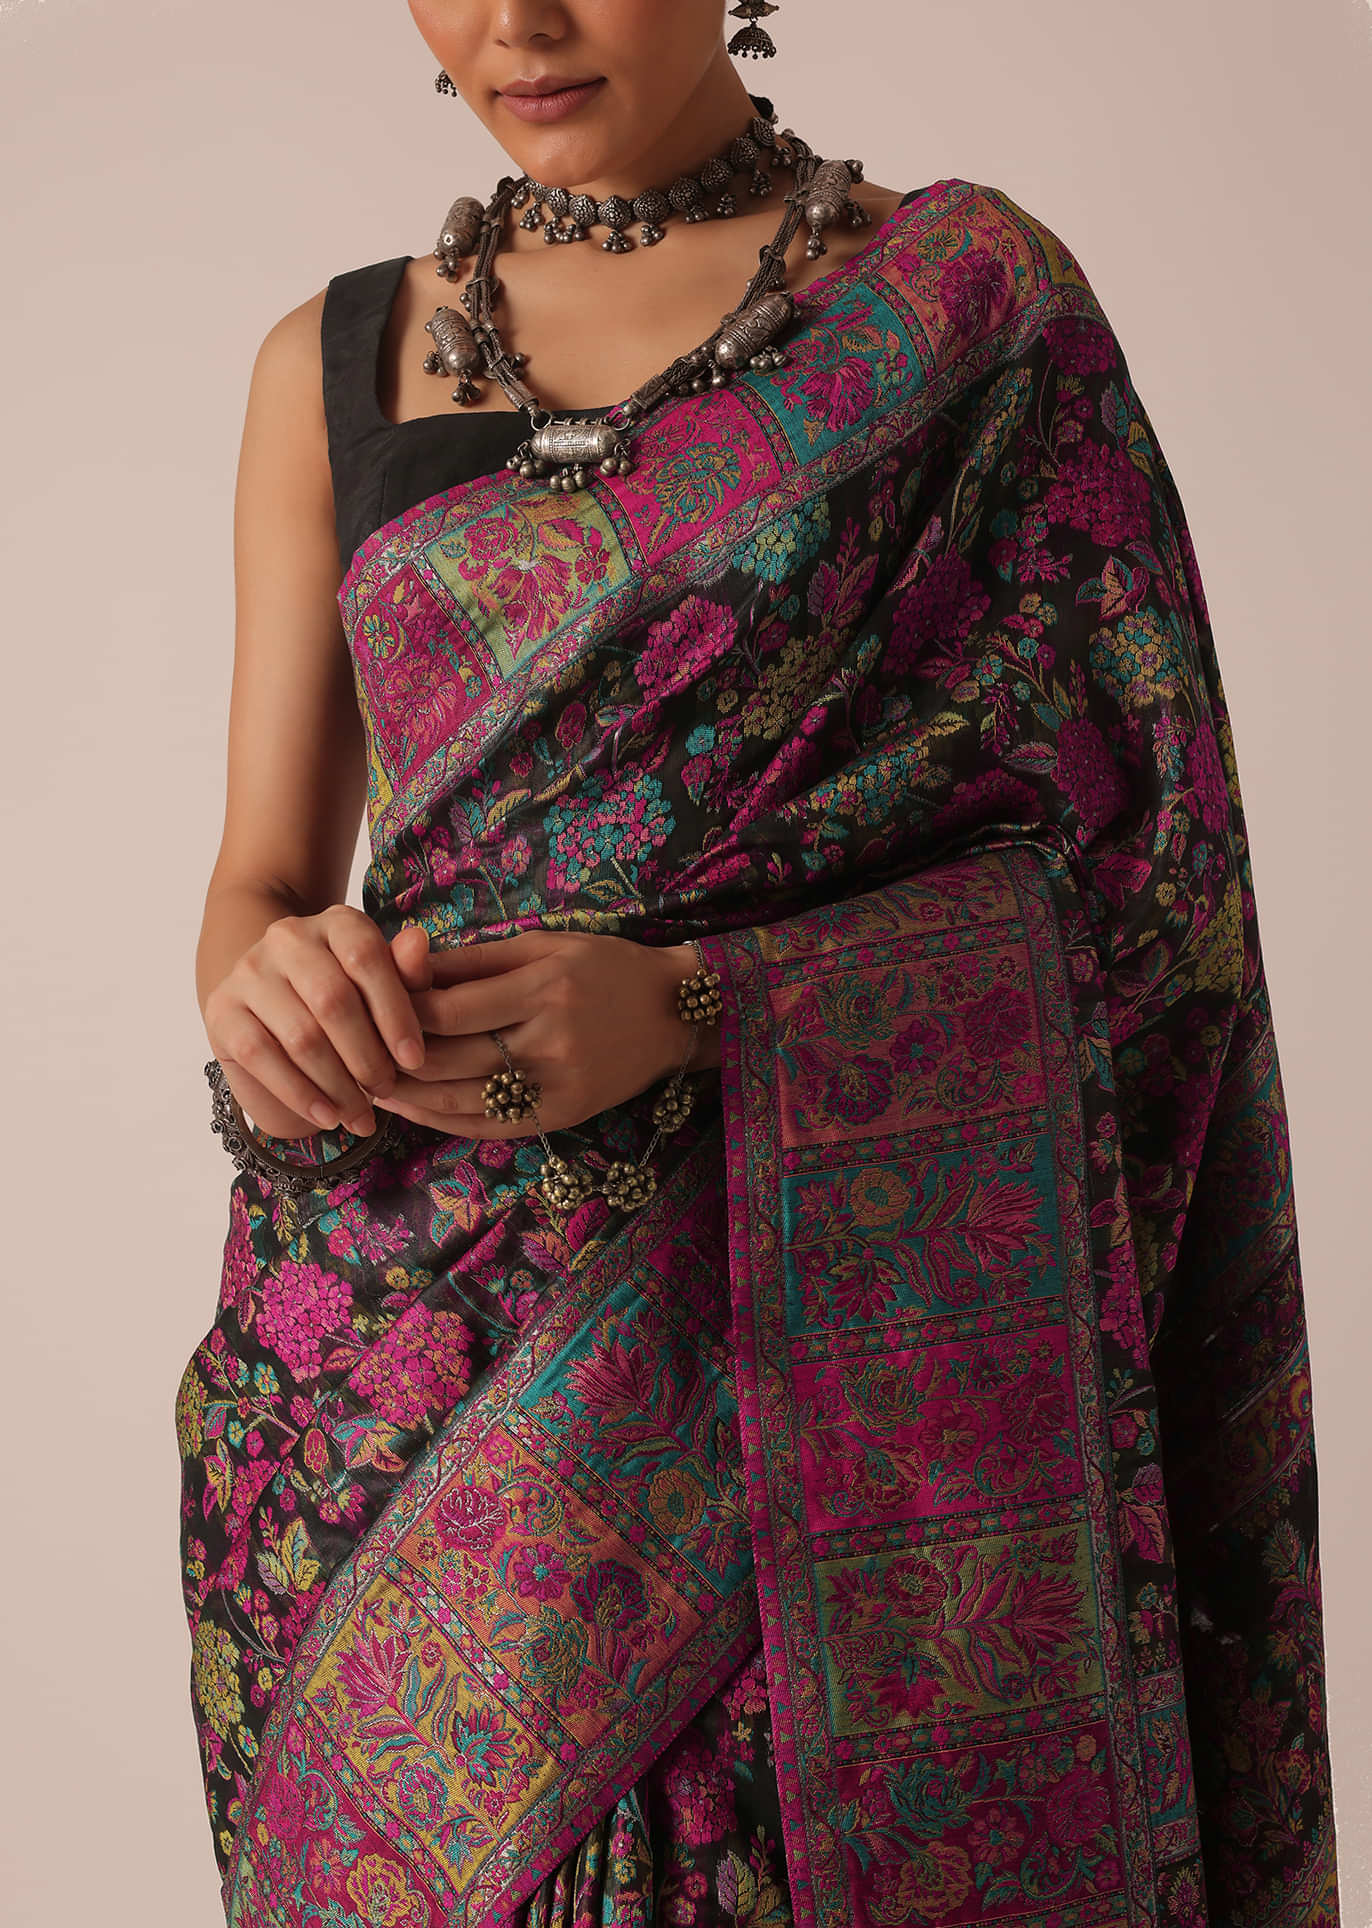 Buy Latest Designer Sarees For Women Online At Upto 80% Off